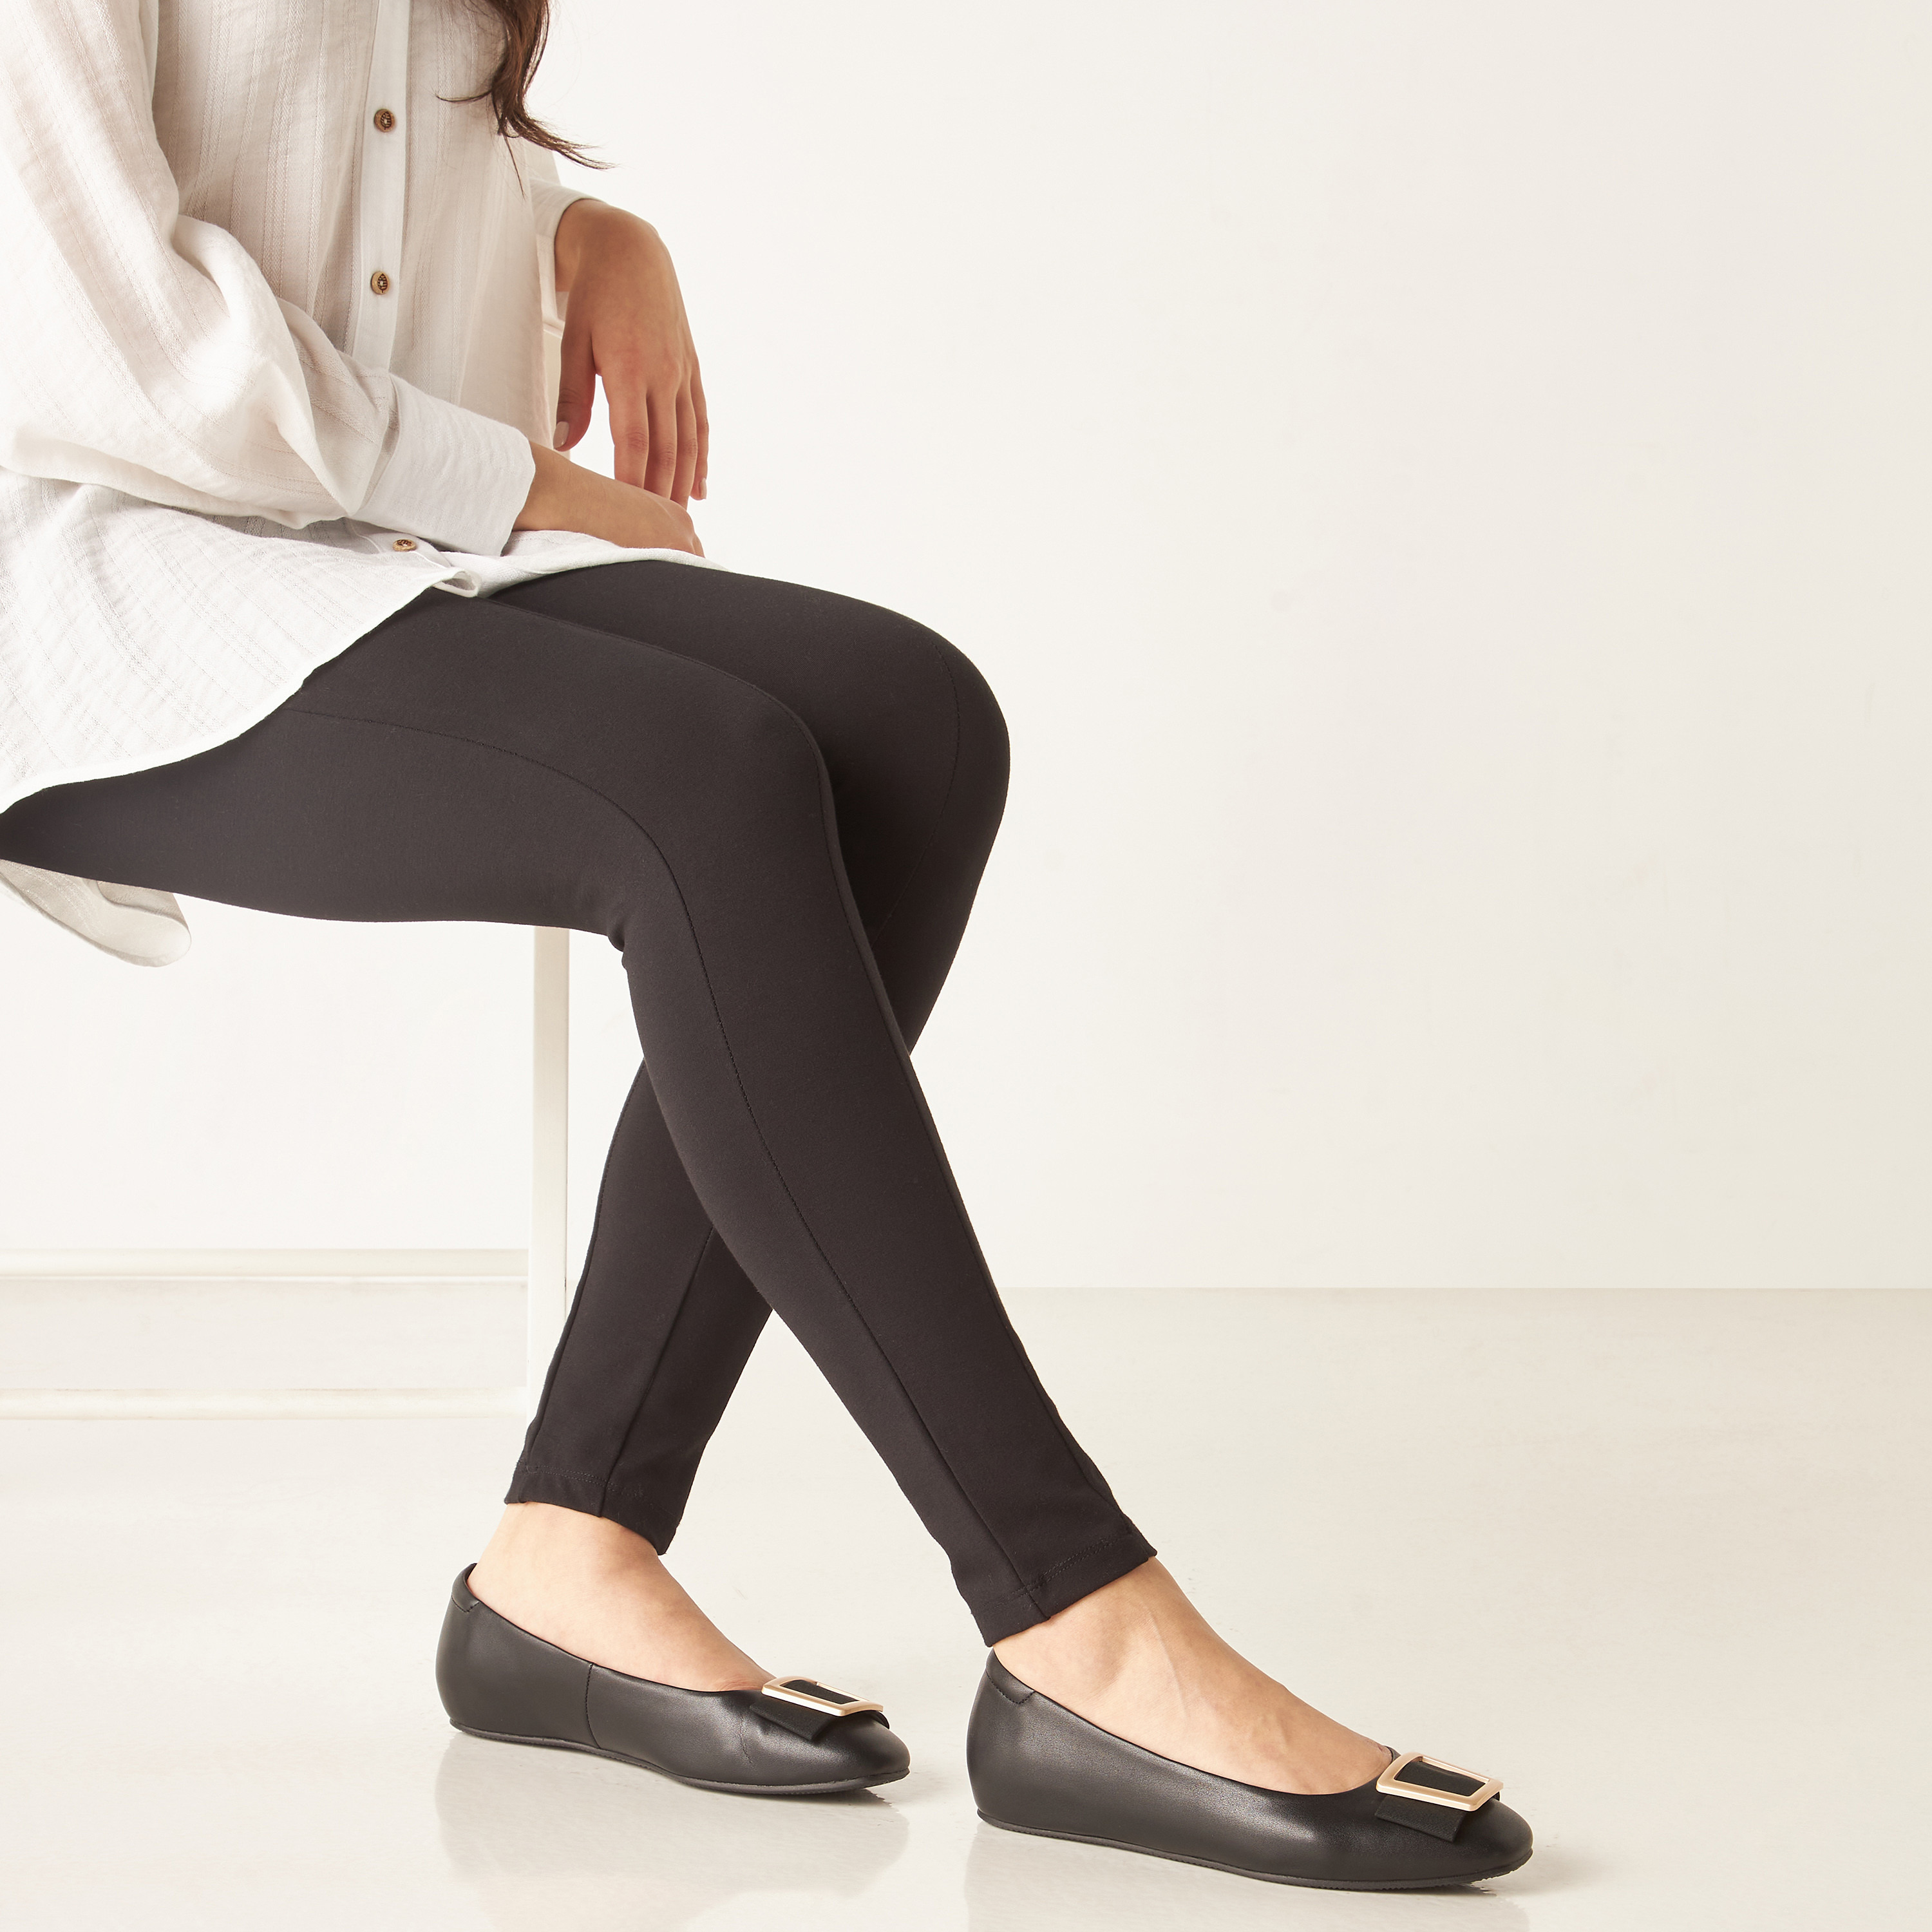 New ballet flats and foot less tights | Perfect for a busy d… | Flickr